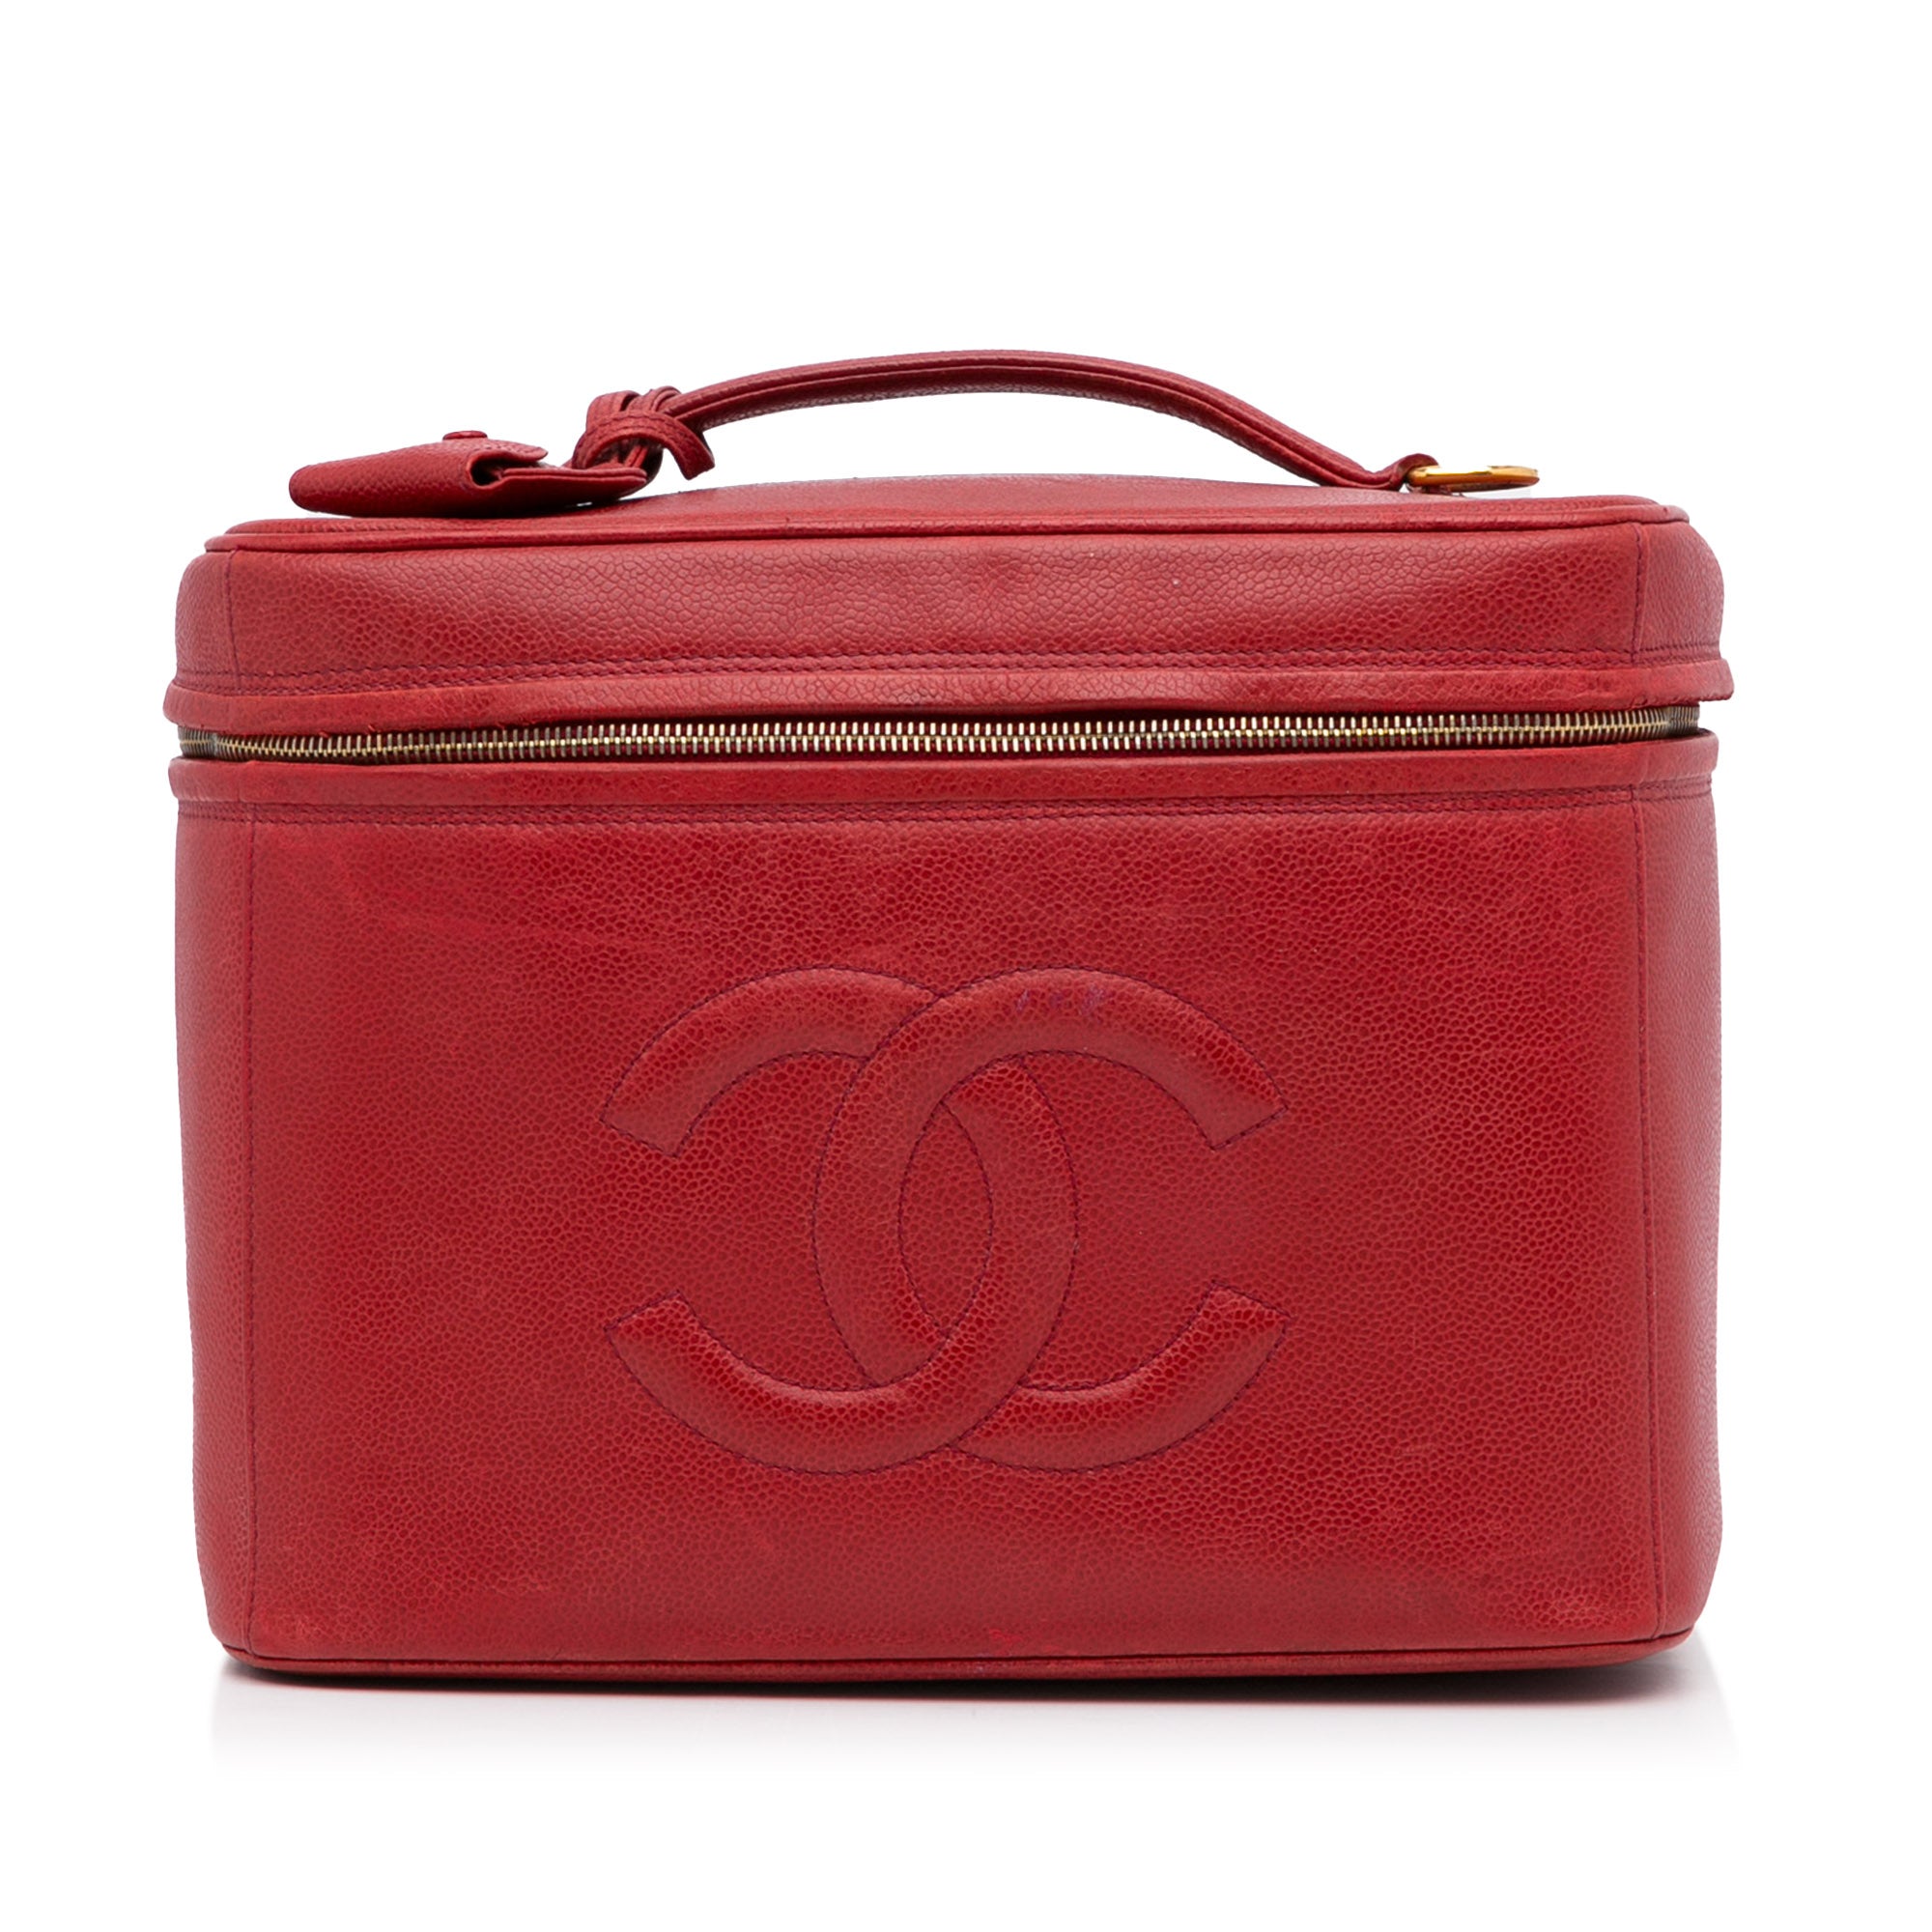 Chanel Vanity Caviar Leather Cosmetic Satchel Bag Red